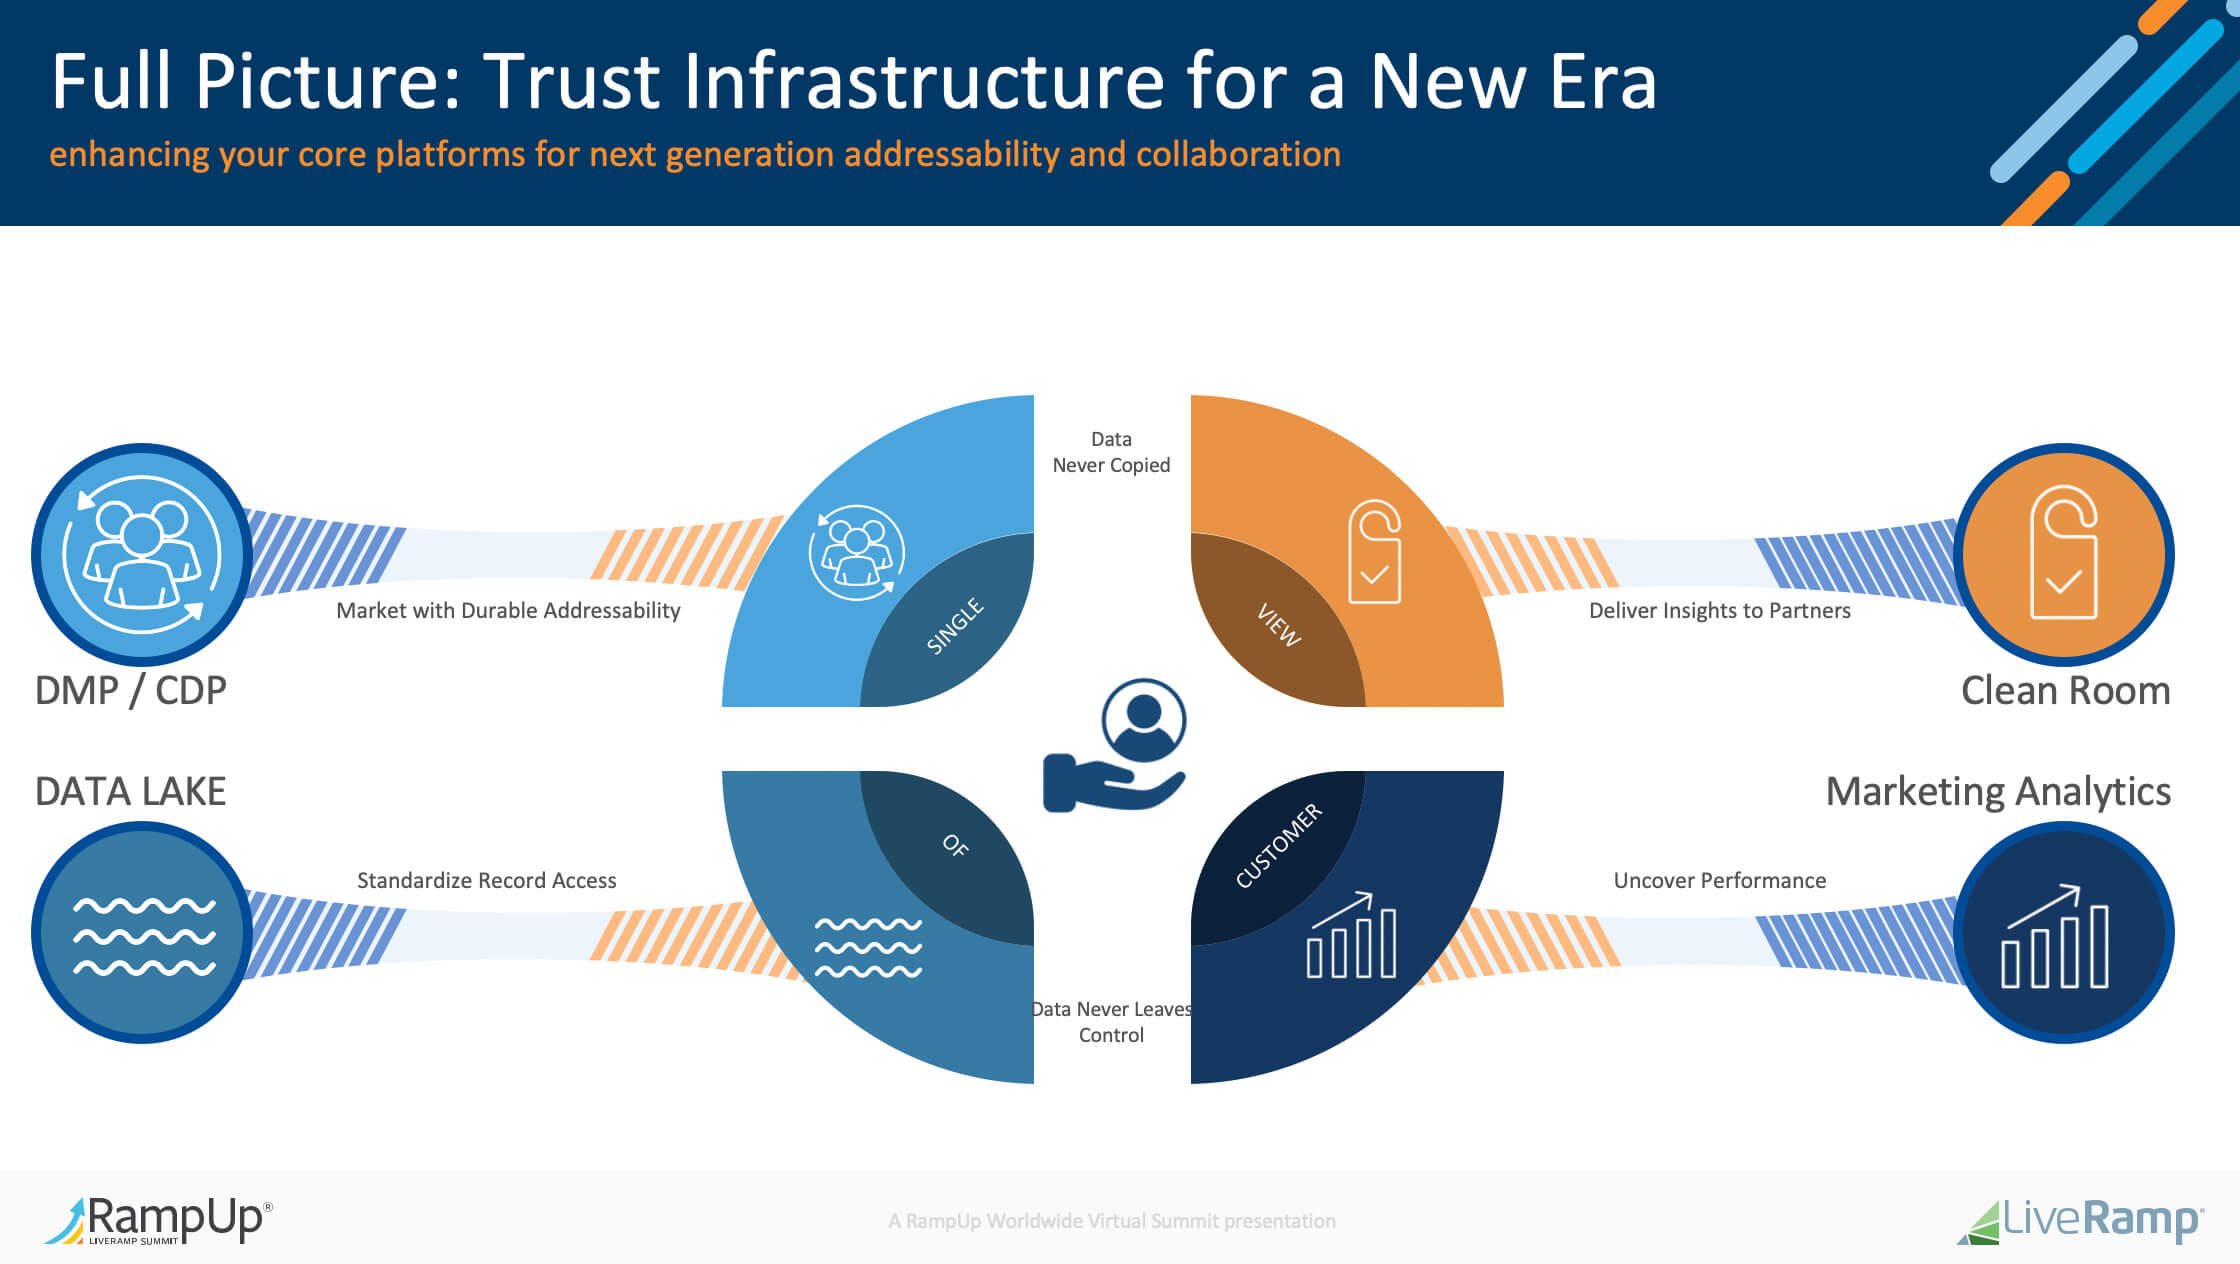 Graphic showing the trust infrastructure of safe haven